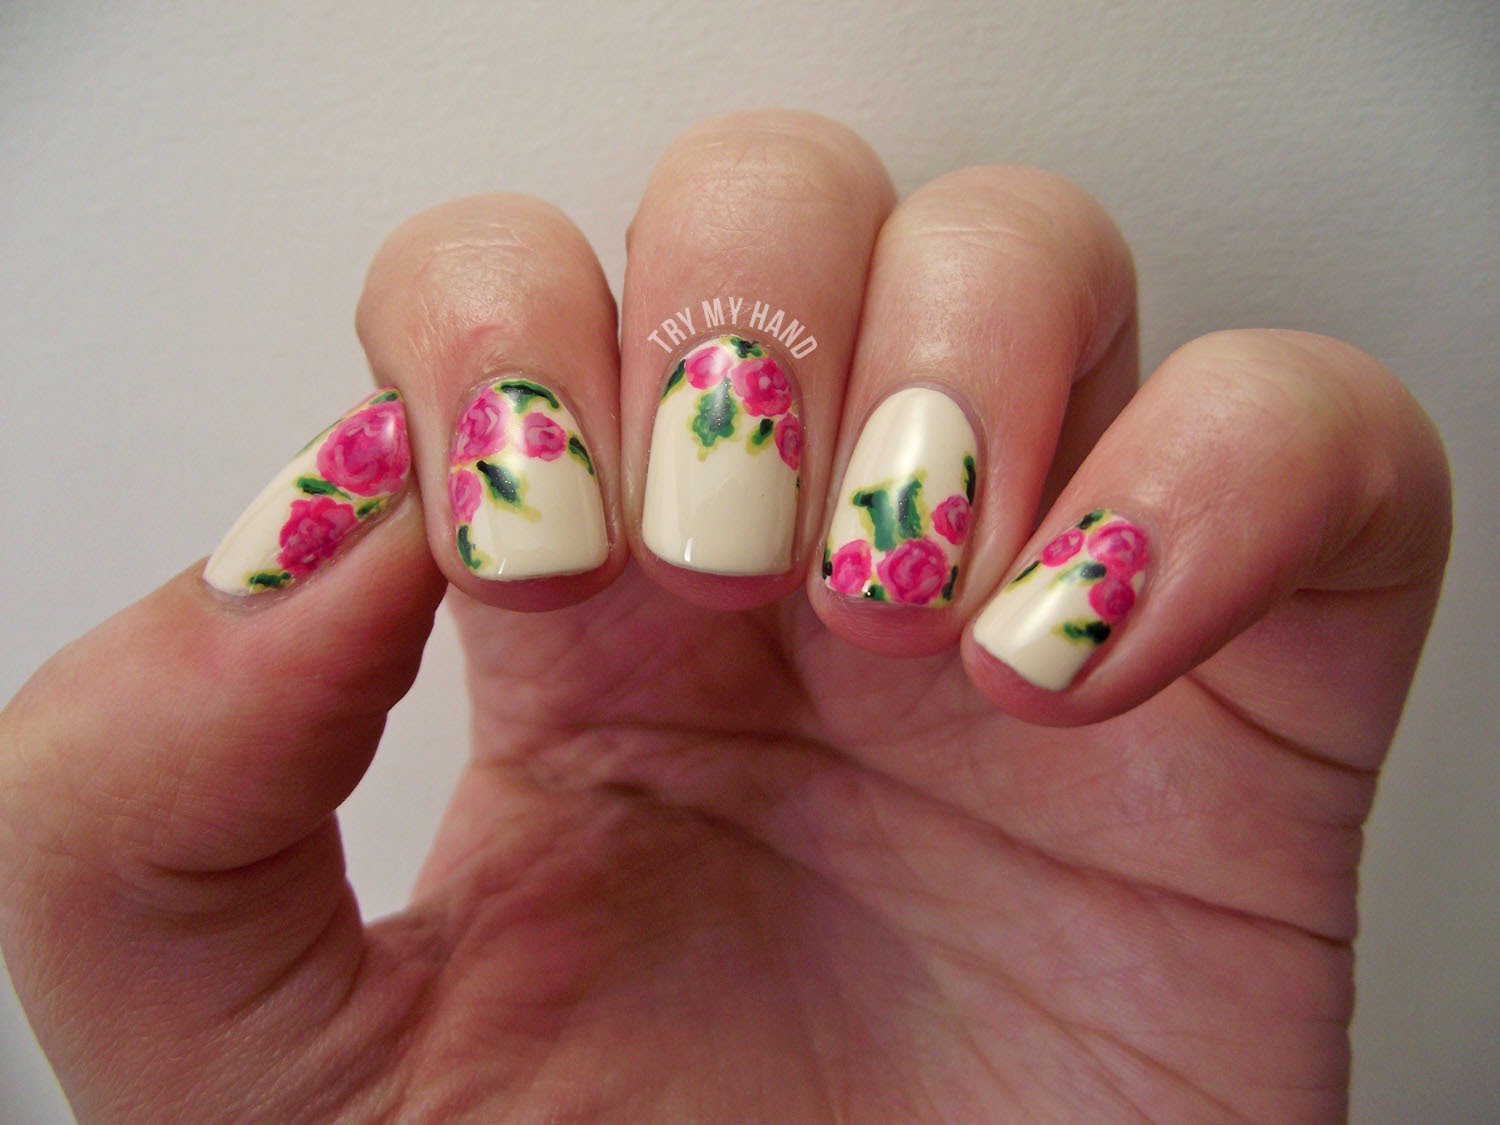 1. "Delicate Floral Nail Art Designs for a Trendy Look" - wide 7